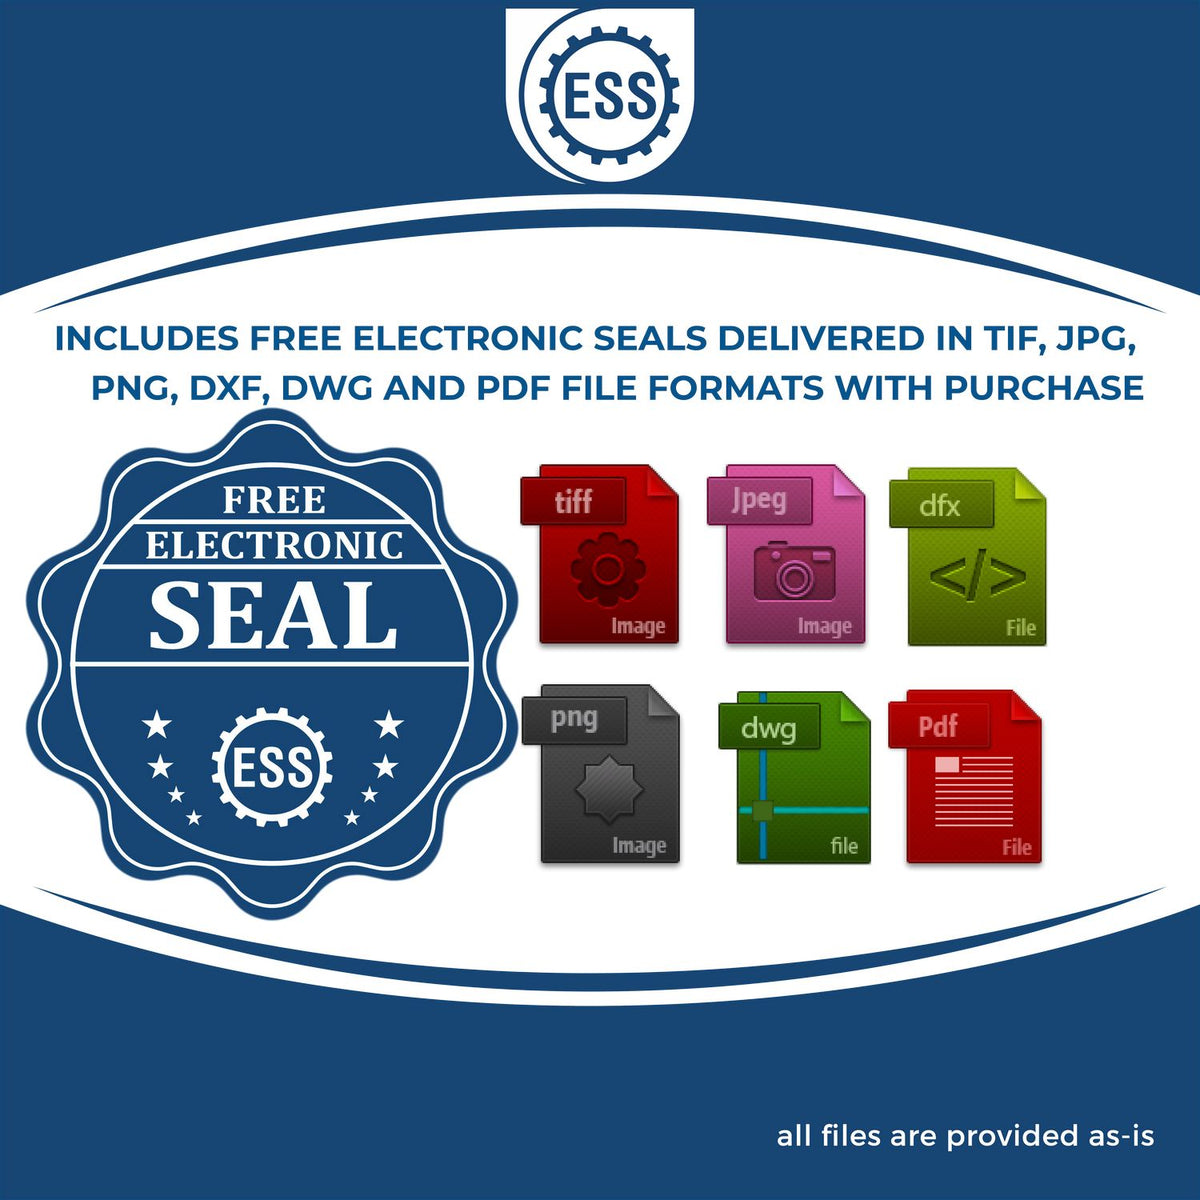 An infographic for the free electronic seal for the Heavy-Duty Pennsylvania Rectangular Notary Stamp illustrating the different file type icons such as DXF, DWG, TIF, JPG and PNG.